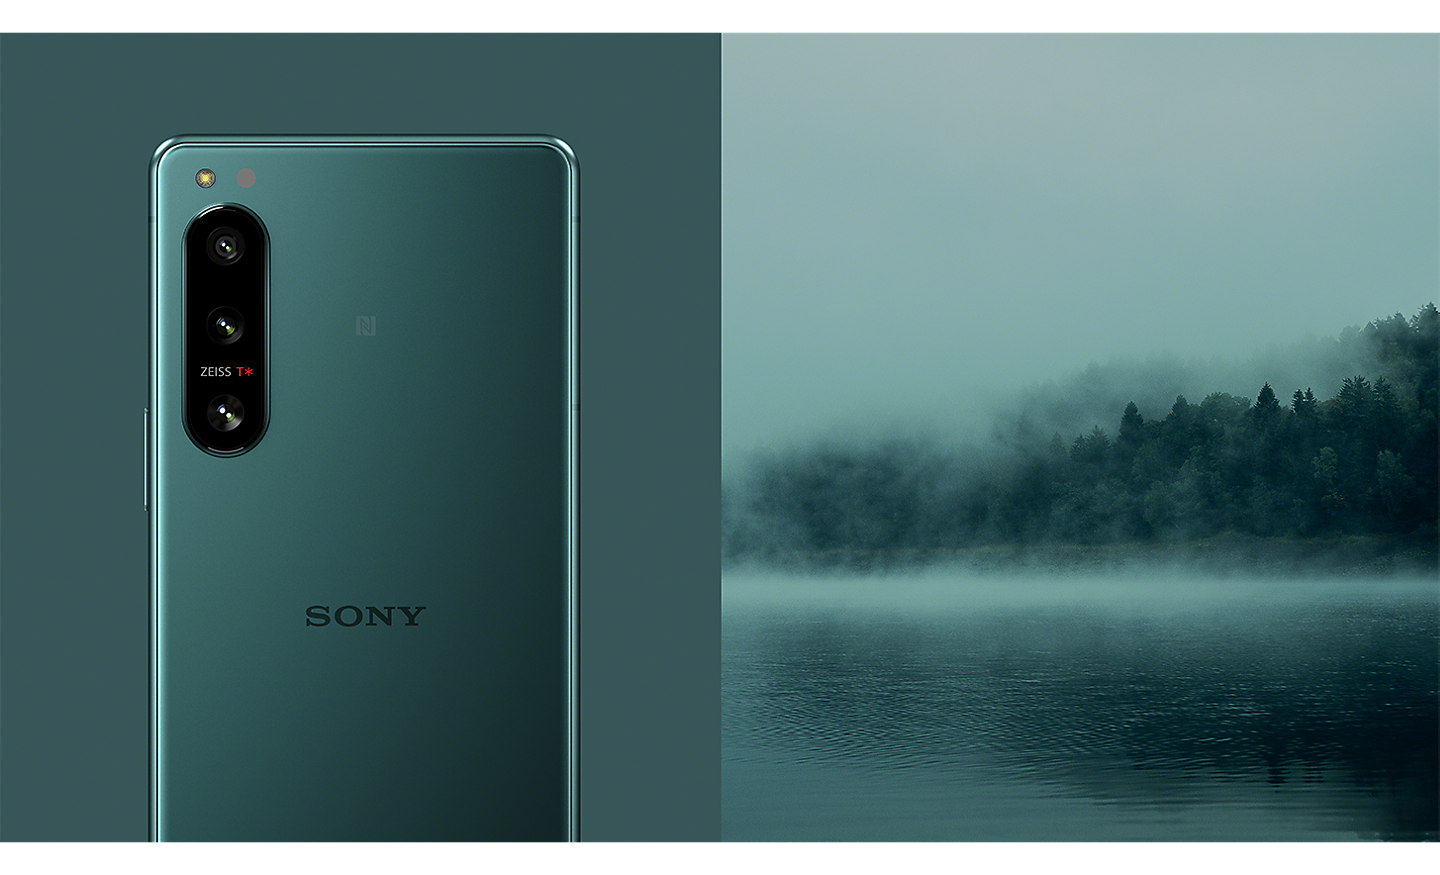 Xperia 5 IV in green next to a green-hued image of a lake and forest